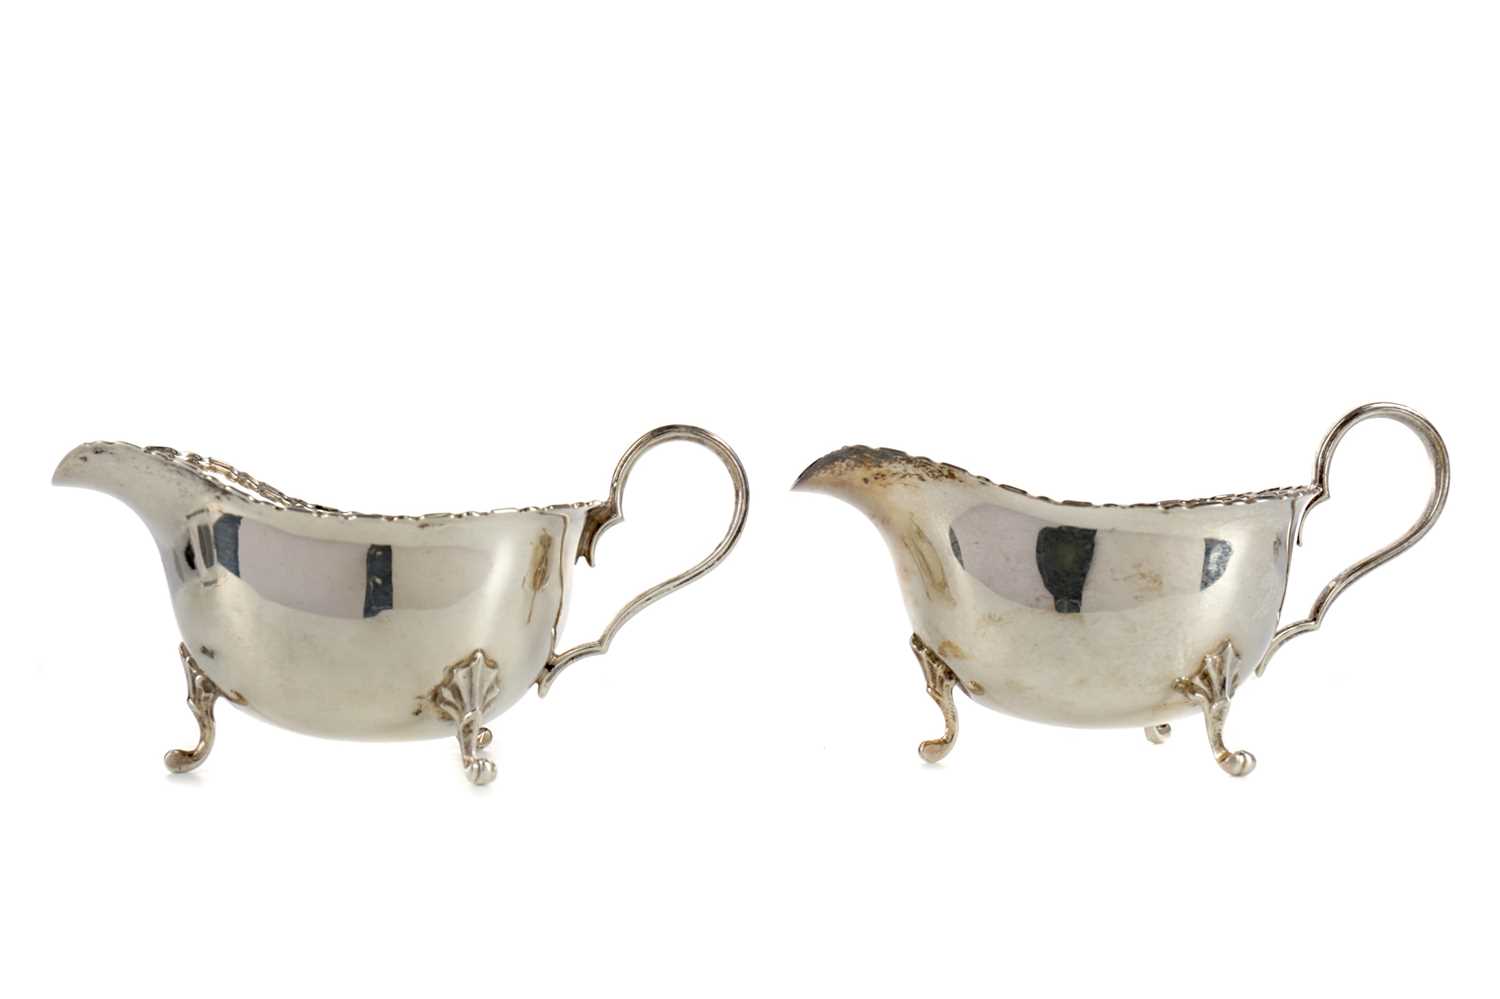 Lot 459 - A PAIR OF EARLY 20TH CENTURY SILVER SAUCE BOATS